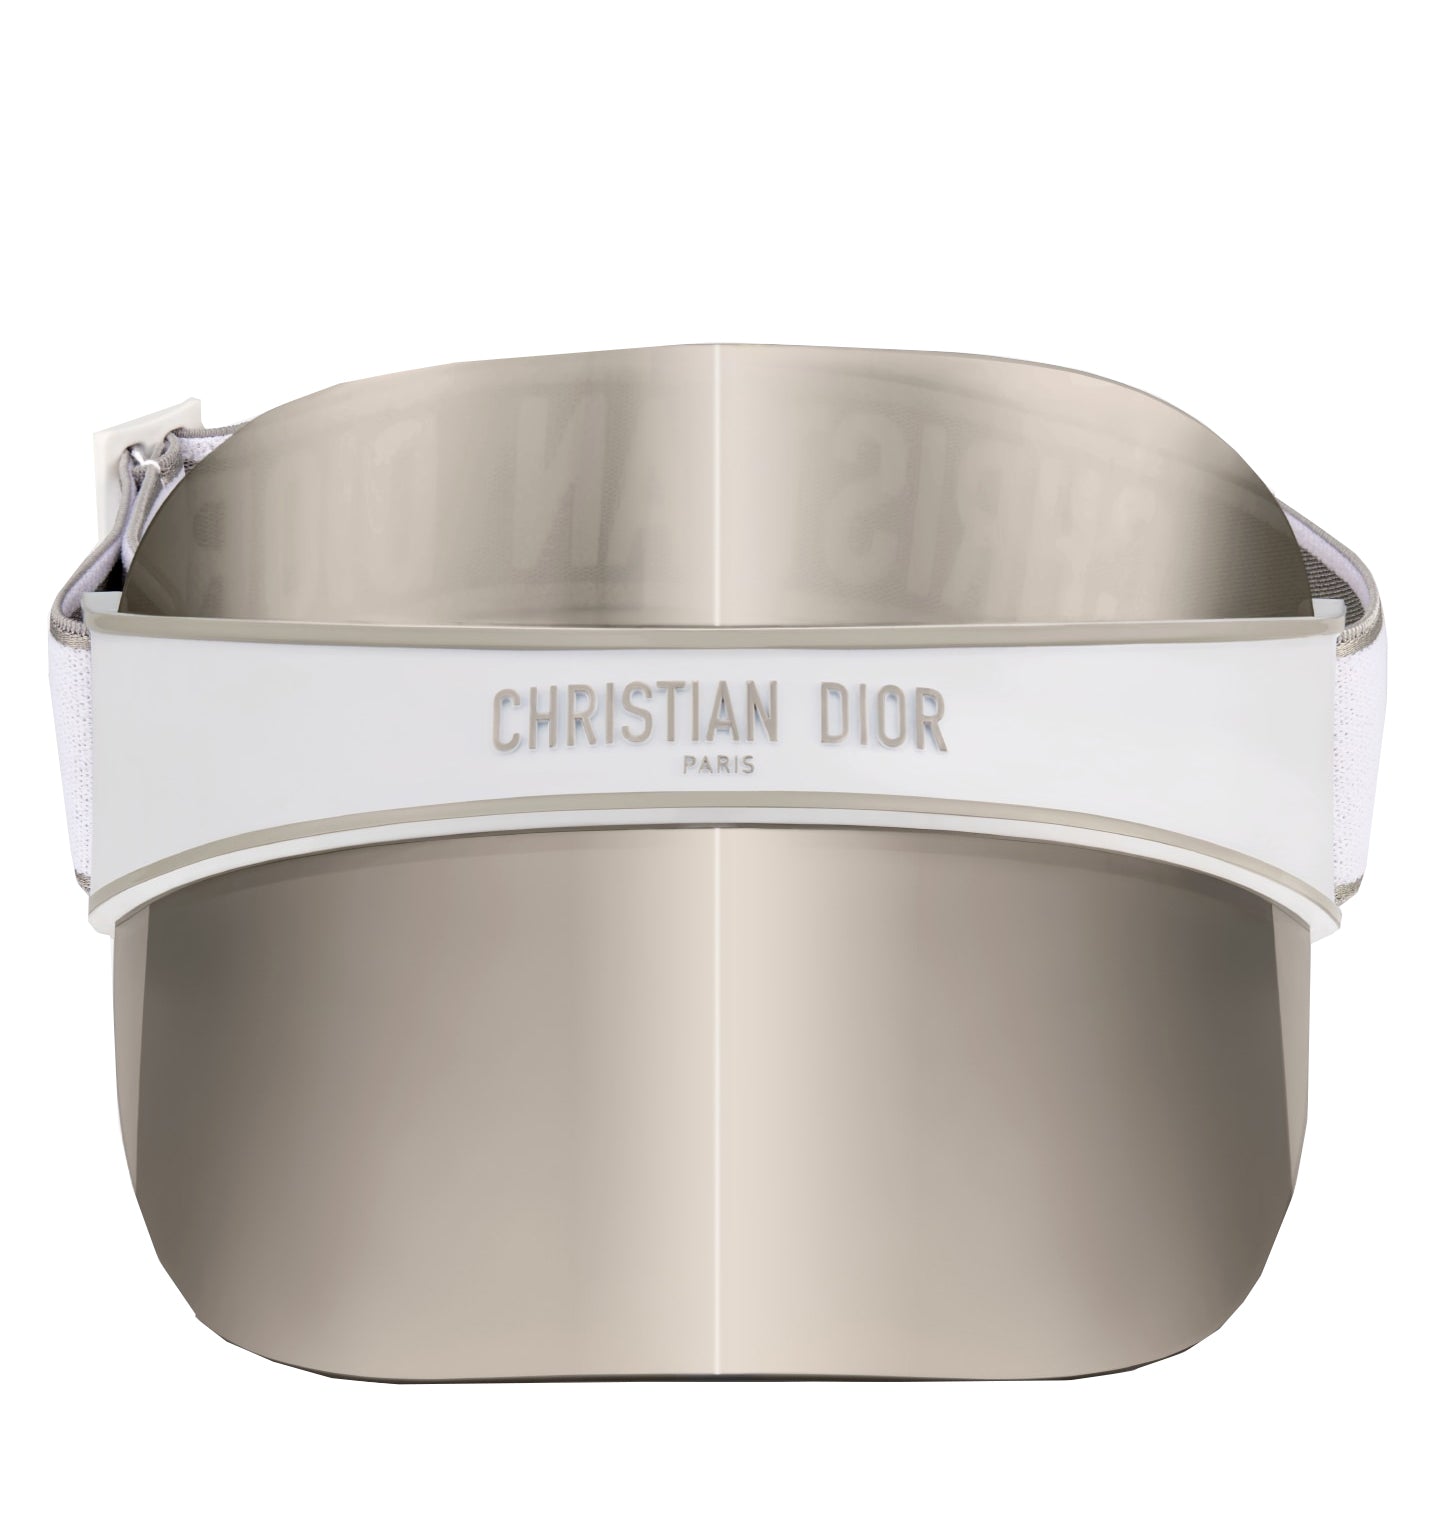 White jacquard stretch band with gray Christian Dior signature